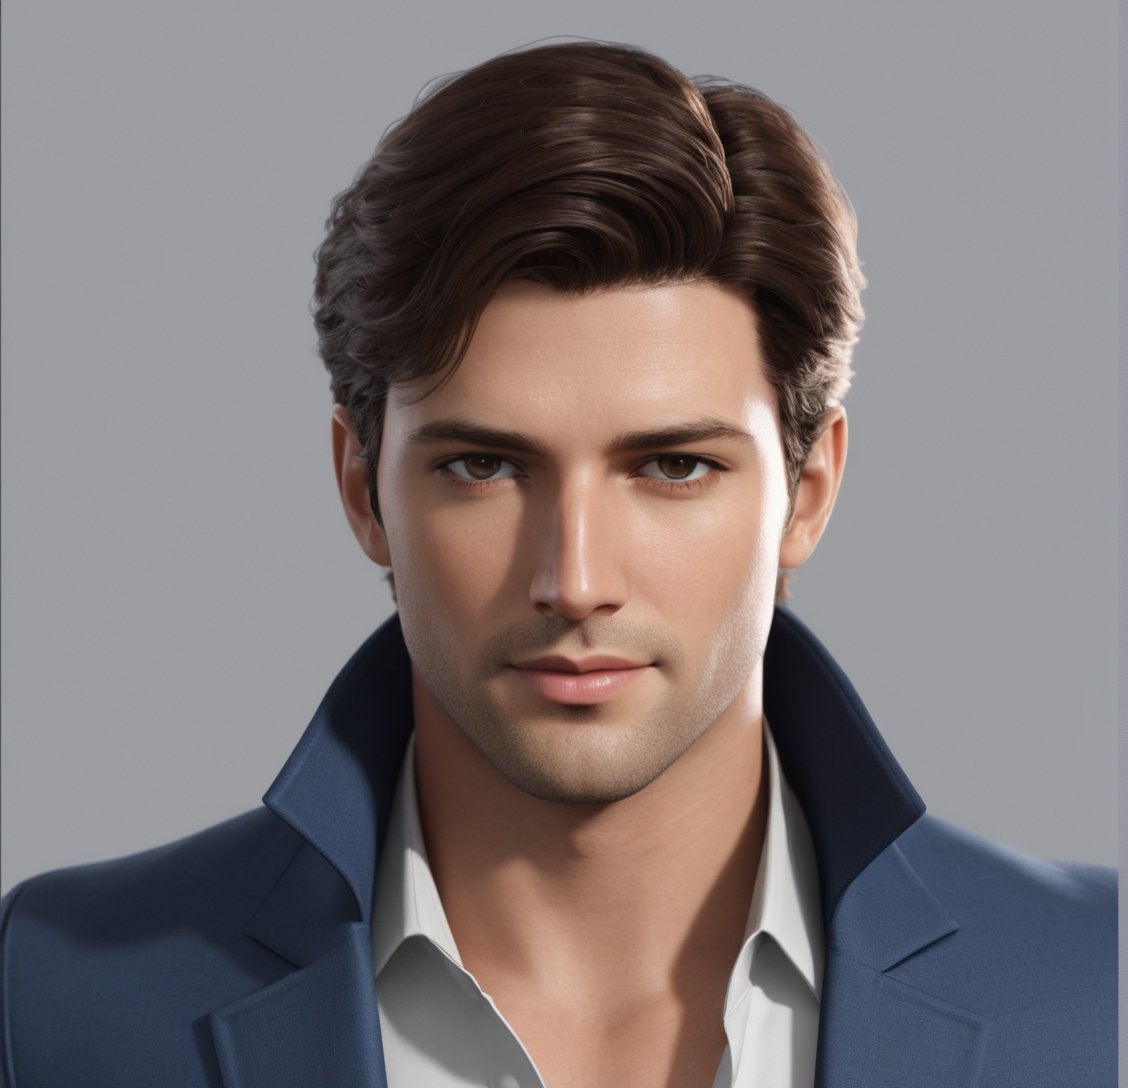 
Generate a realistic Spanish MAN with dark brown hair and brown eyes and white skin and a blue jacket based on these links:
https://www.facebook.com/photo/?fbid=7222619341193542&set=a.7222620204526789, https://www.facebook.com/photo/?fbid=7222619391193537&set=a.7222620204526789, https://www.facebook.com/photo/?fbid=7222619424526867&set=a.7222620204526789, https://www.facebook.com/photo/?fbid=7222619274526882&set=a.7222620204526789, https://www.facebook.com/photo/?fbid=7222617957860347&set=a.7222620204526789, https://www.facebook.com/photo/?fbid=7222619187860224&set=a.7222620204526789, https://www.facebook.com/photo/?fbid=7222618941193582&set=a.7222620204526789, https://www.facebook.com/photo/?fbid=7222619281193548&set=a.7222620204526789